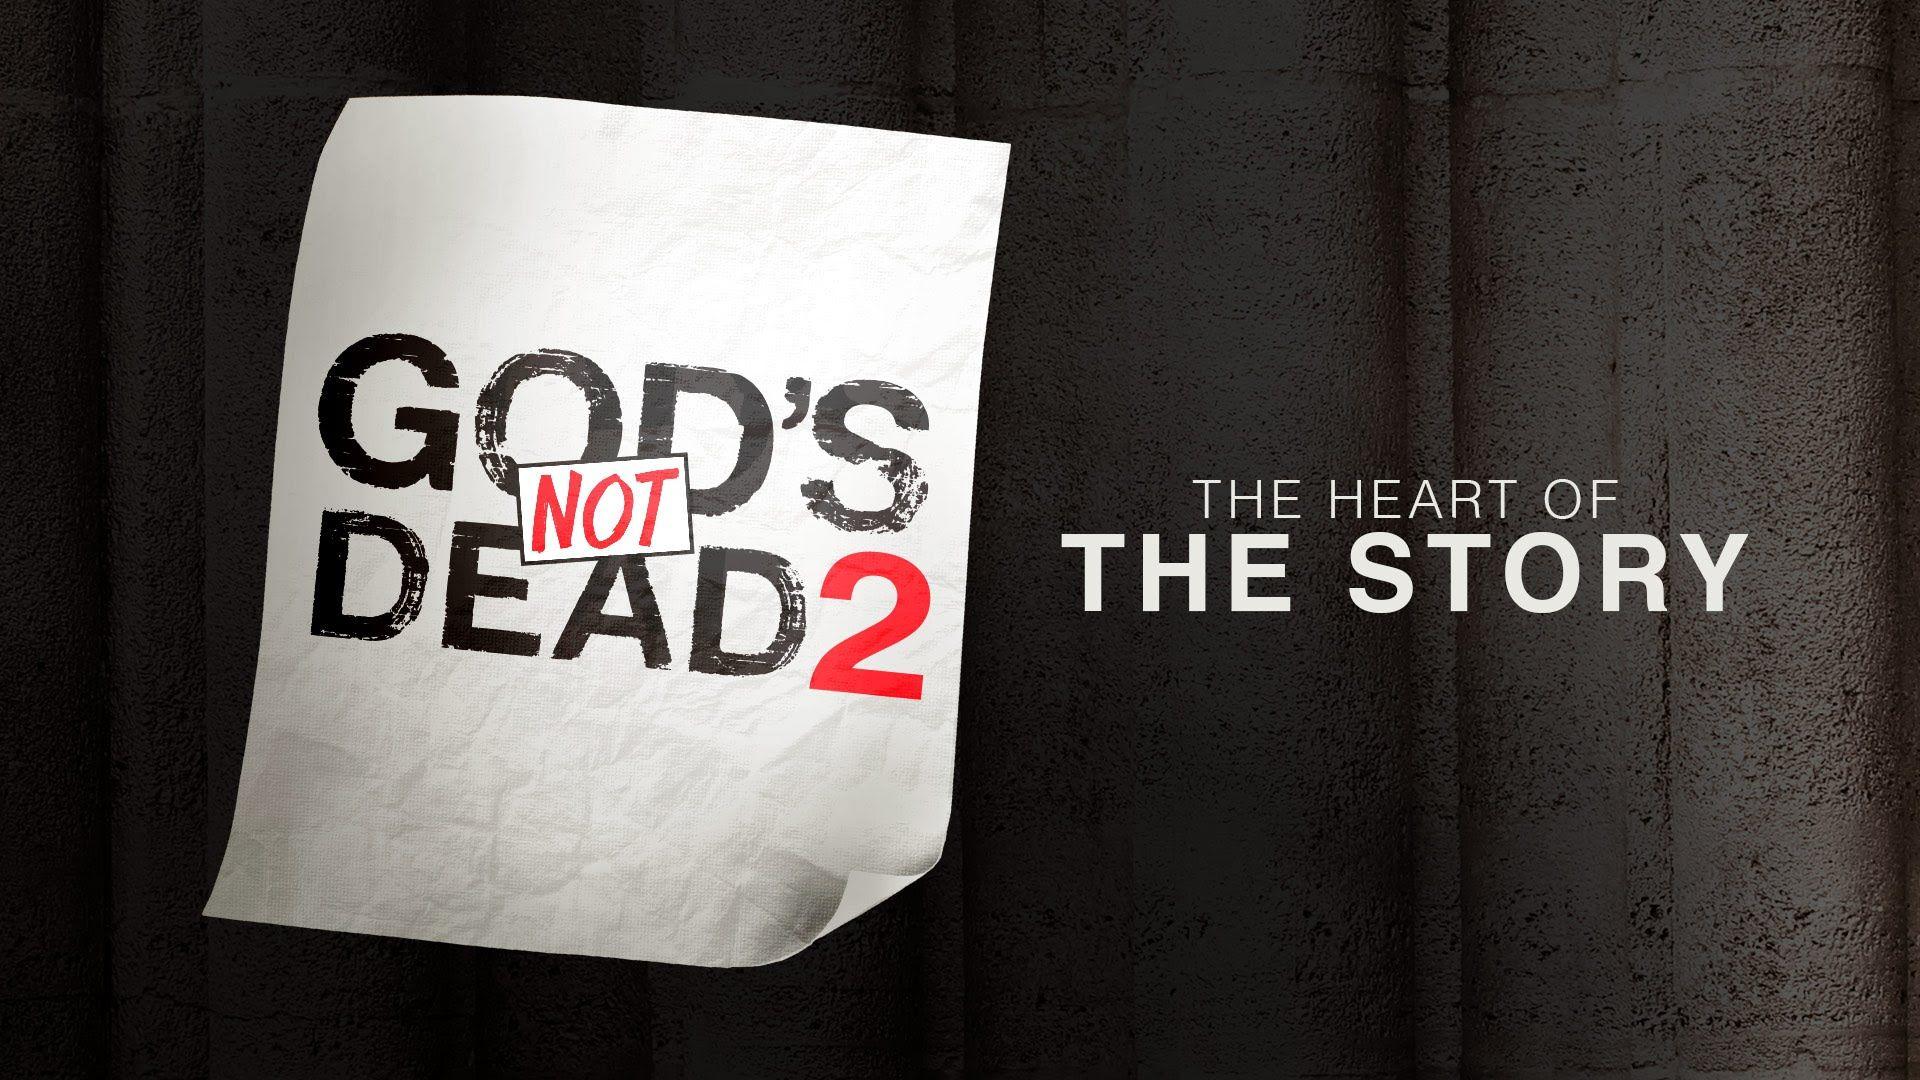 God's Not Dead 2: The Heart of the Story